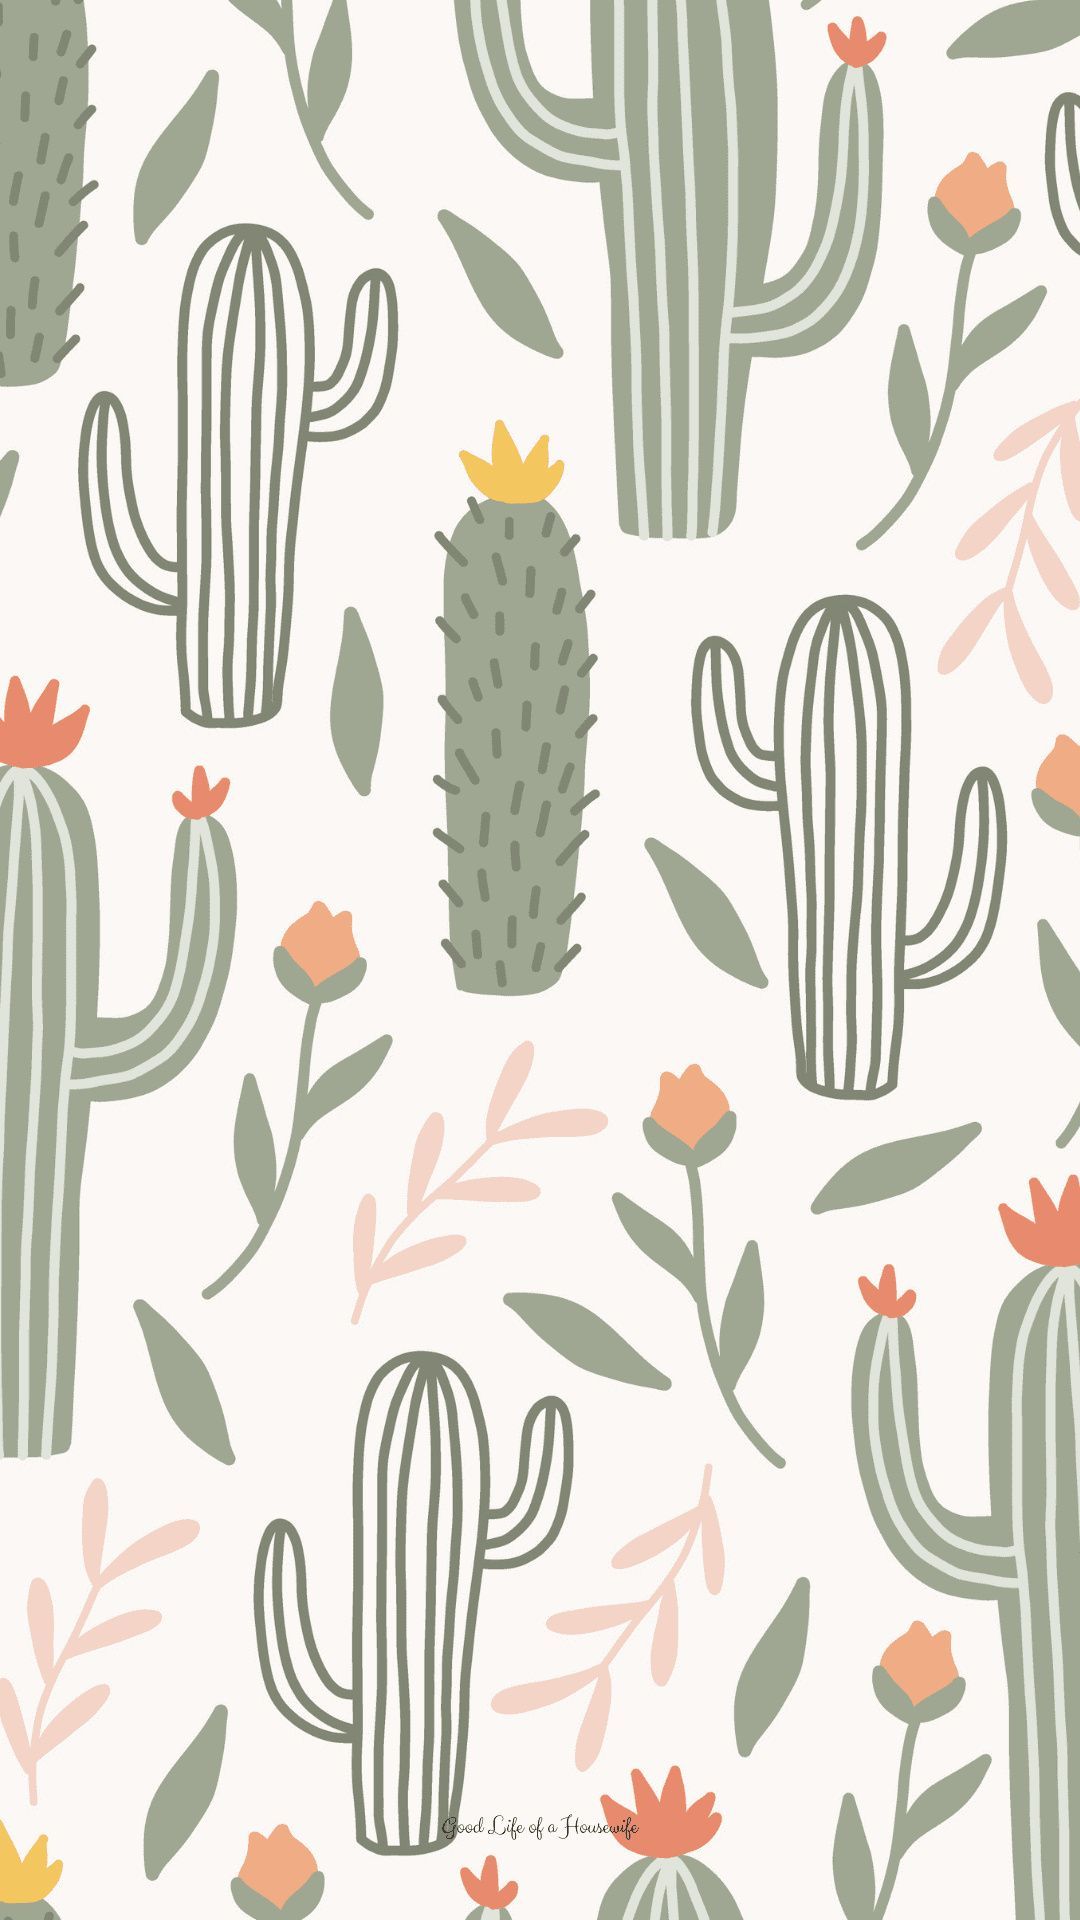 Cactus iPhone background  Good Life of a Housewife